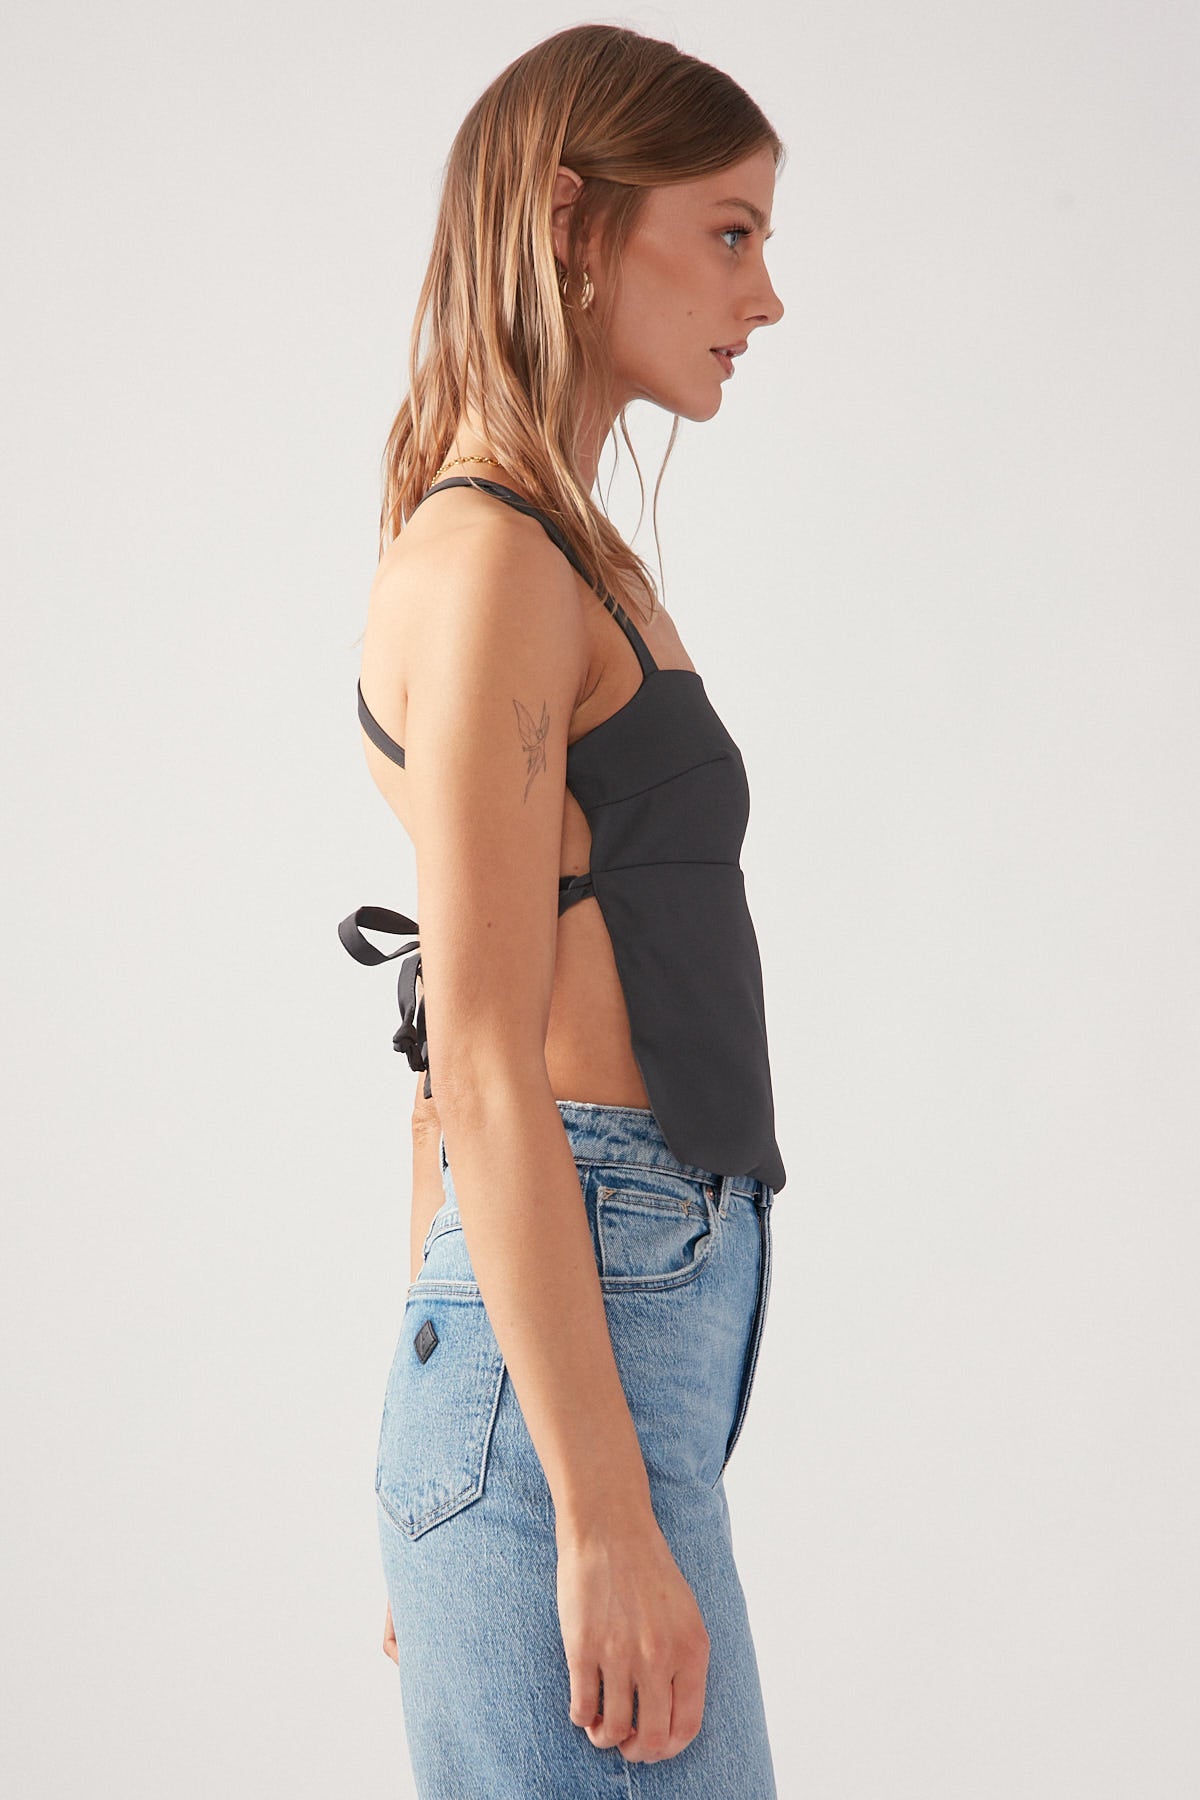 Perfect Stranger Lace Up Back Tie Top Charcoal